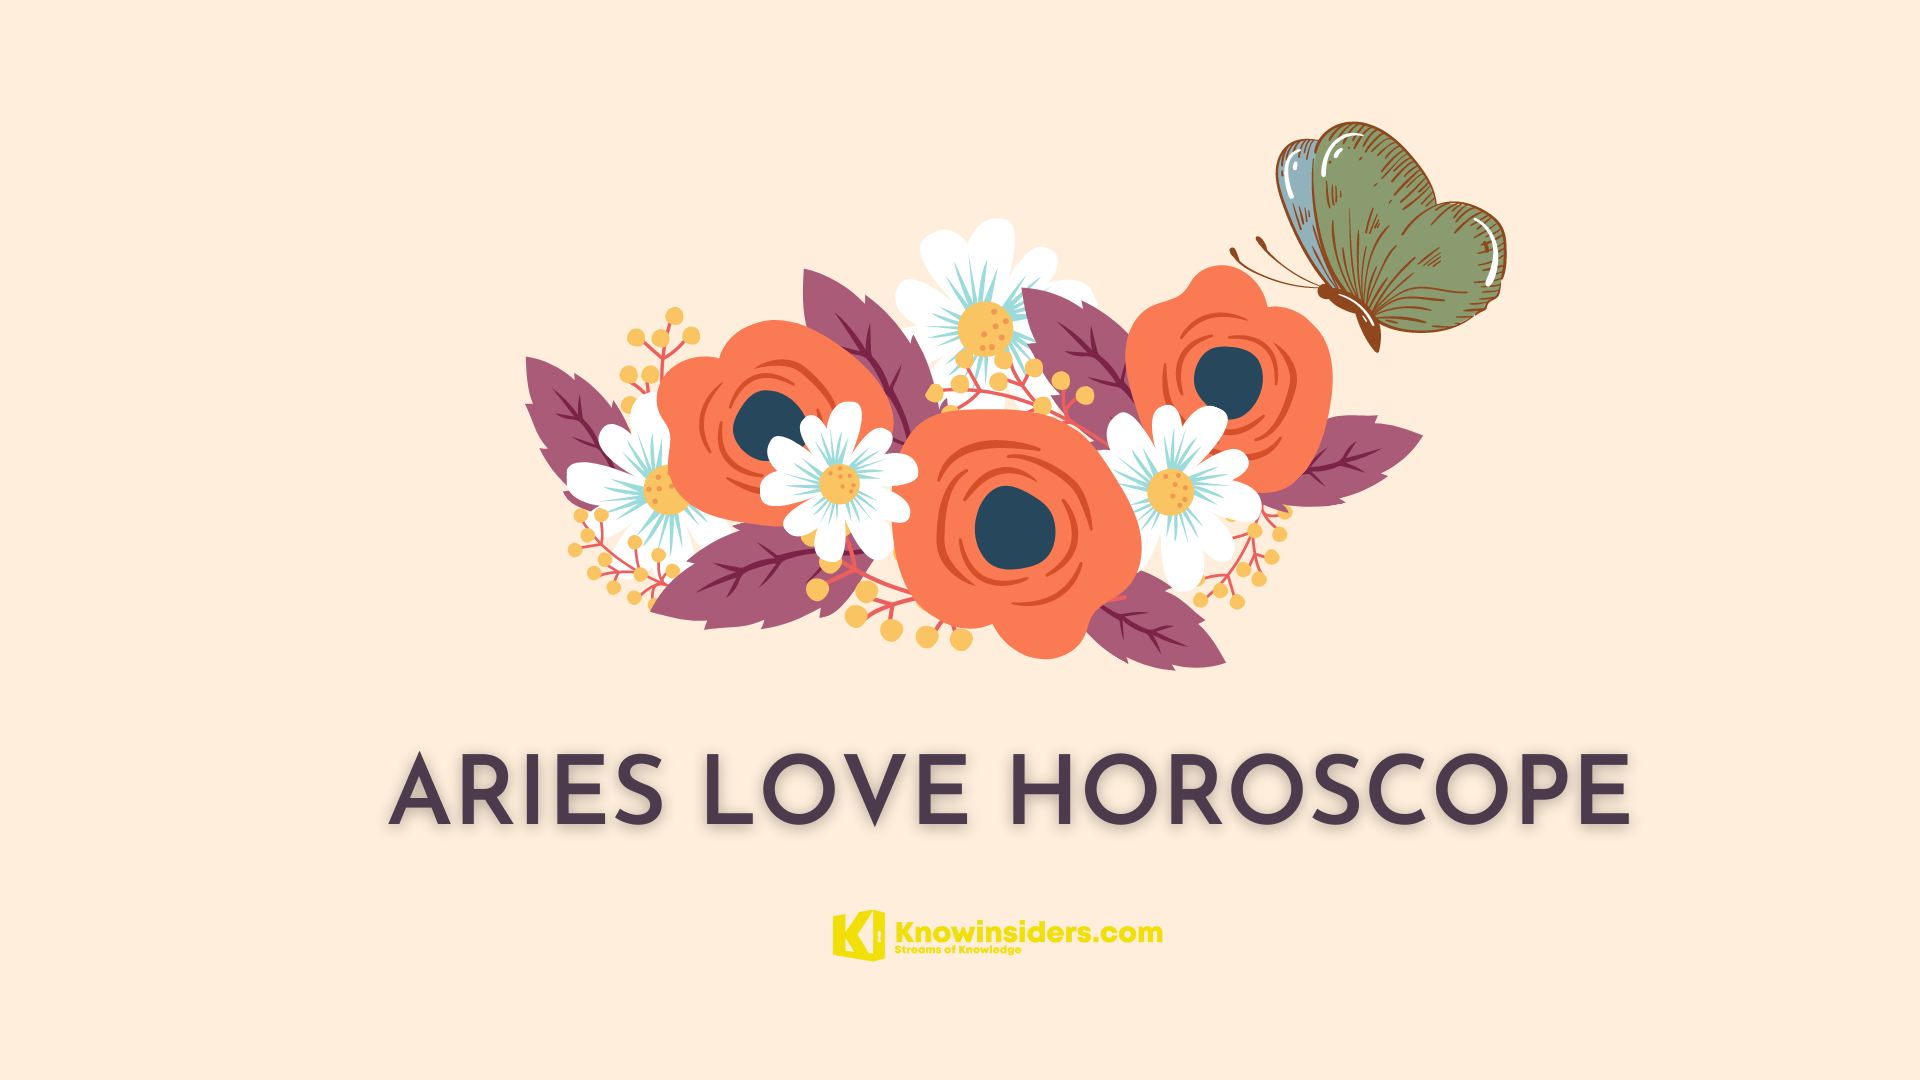 ARIES Horoscope: Astrological Prediction for Love, Relationship For Life